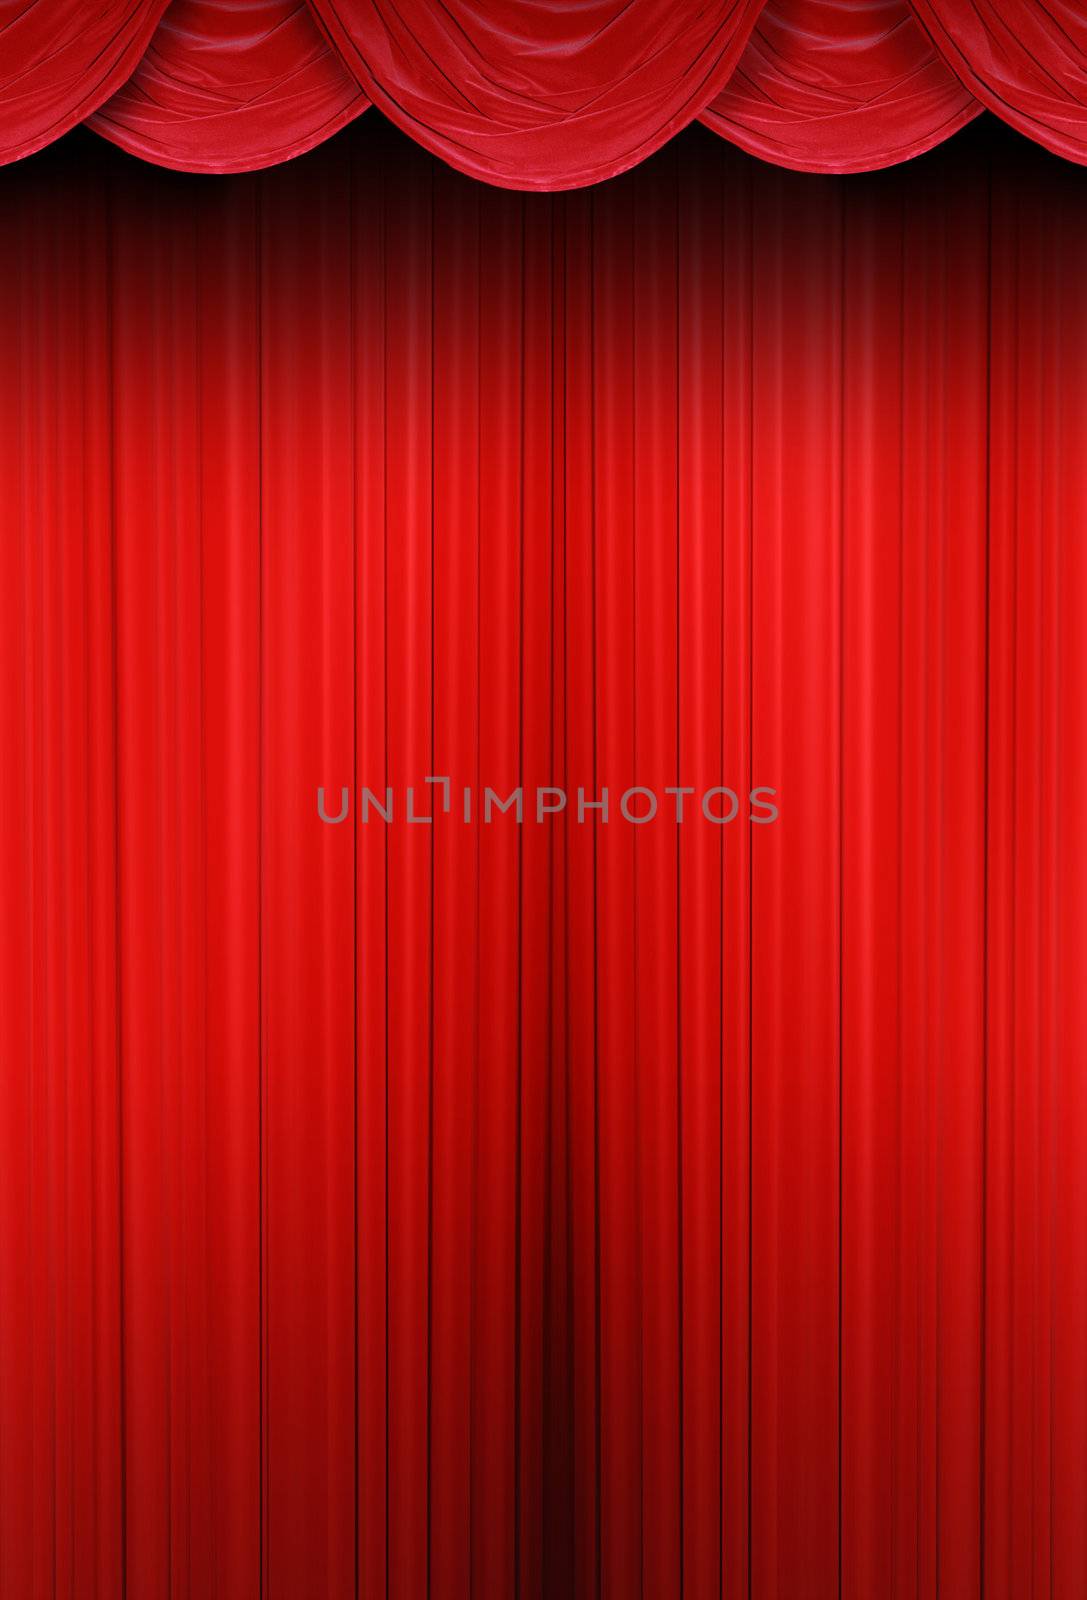 Theater curtains of red cloth  by photochecker